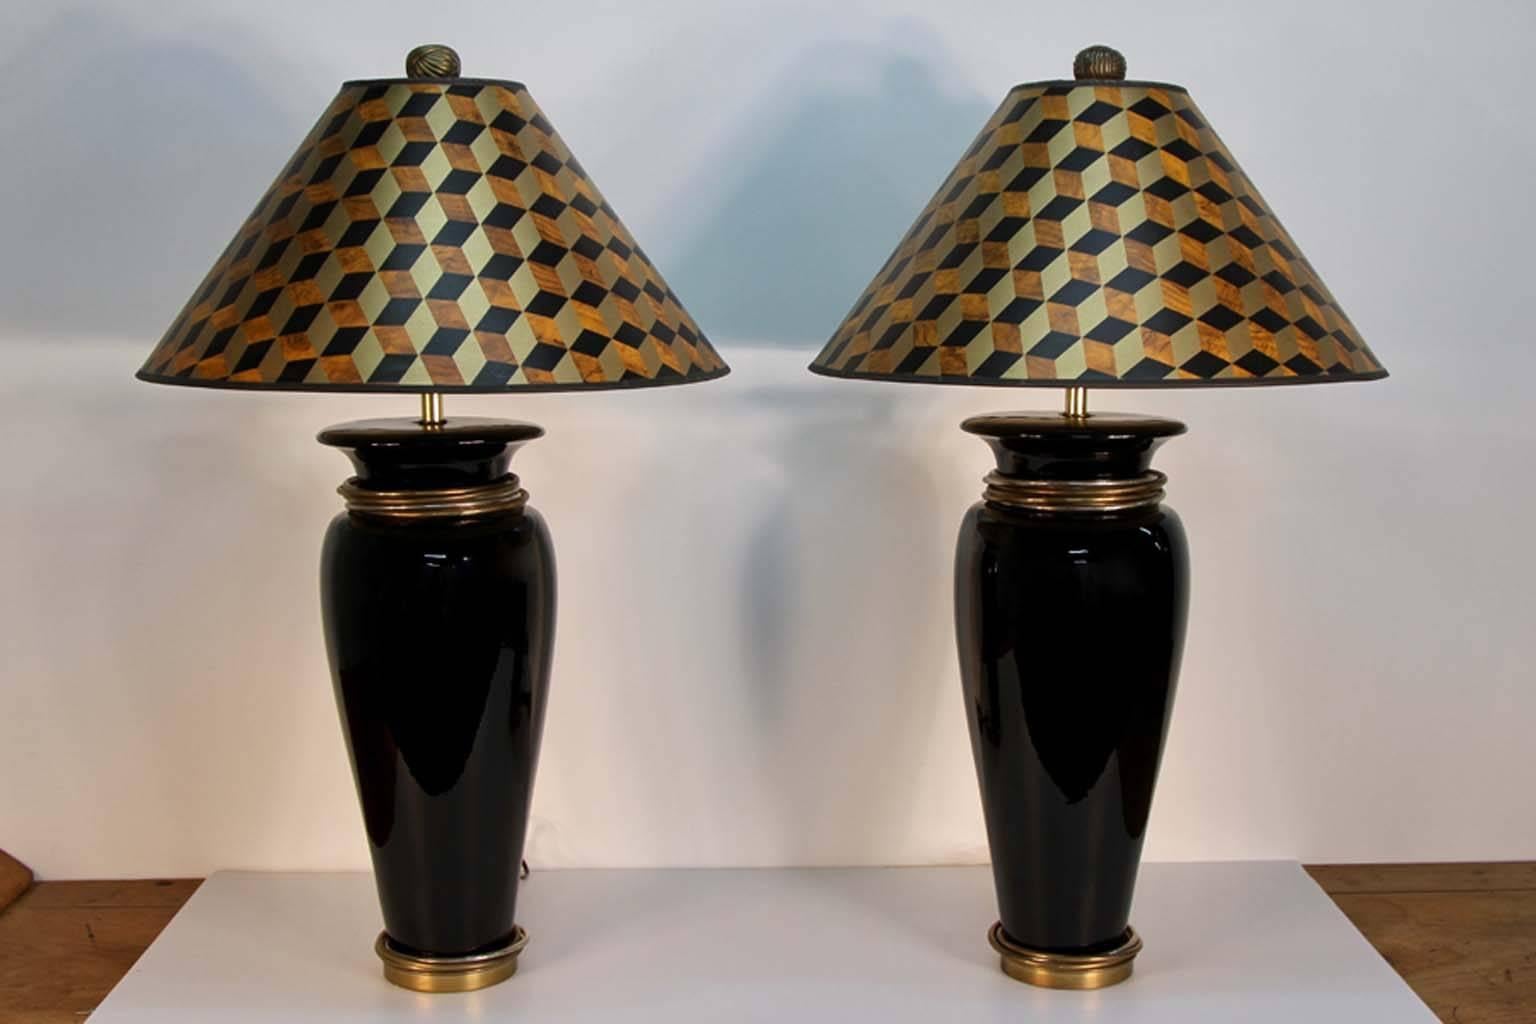 Pair of Chapman table lamps with black ceramic vase form lamps. Tonal metal loose rings at the neck and base, retaining their original optical grid pattern paper shades, substantial knob finials, and dated labels.